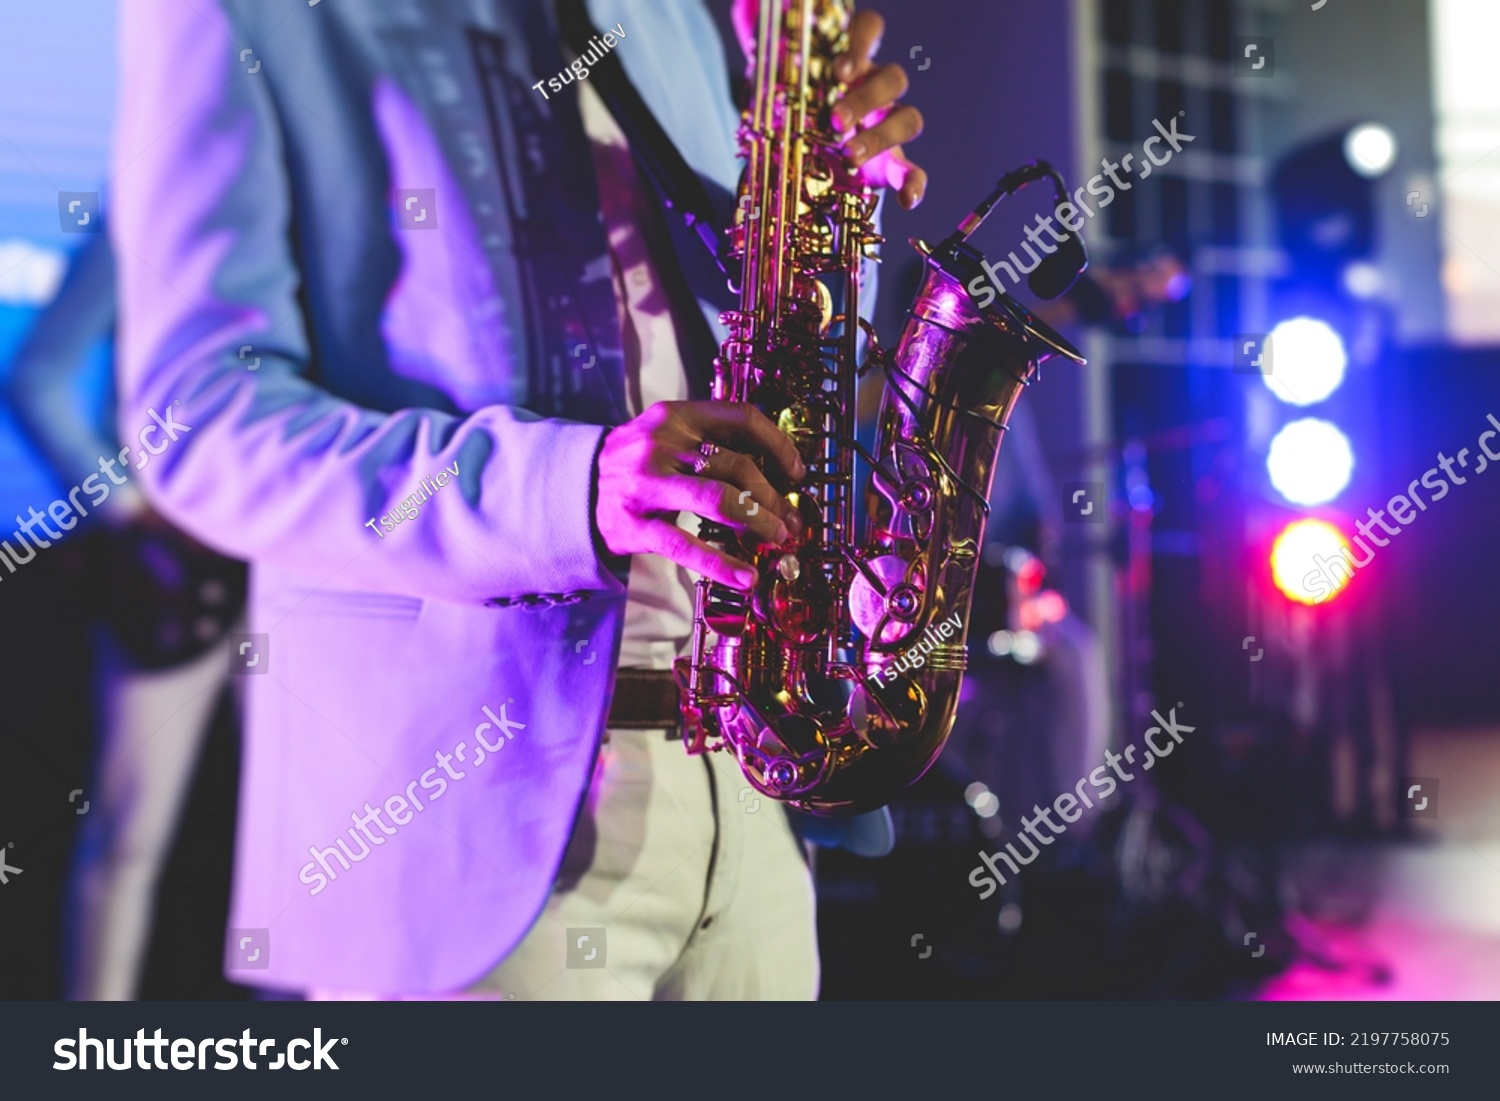 Concert view of saxophonist, a saxophone sax player with vocalist and musical band during jazz orchestra show performing music on stage in the scene lights
 #2197758075